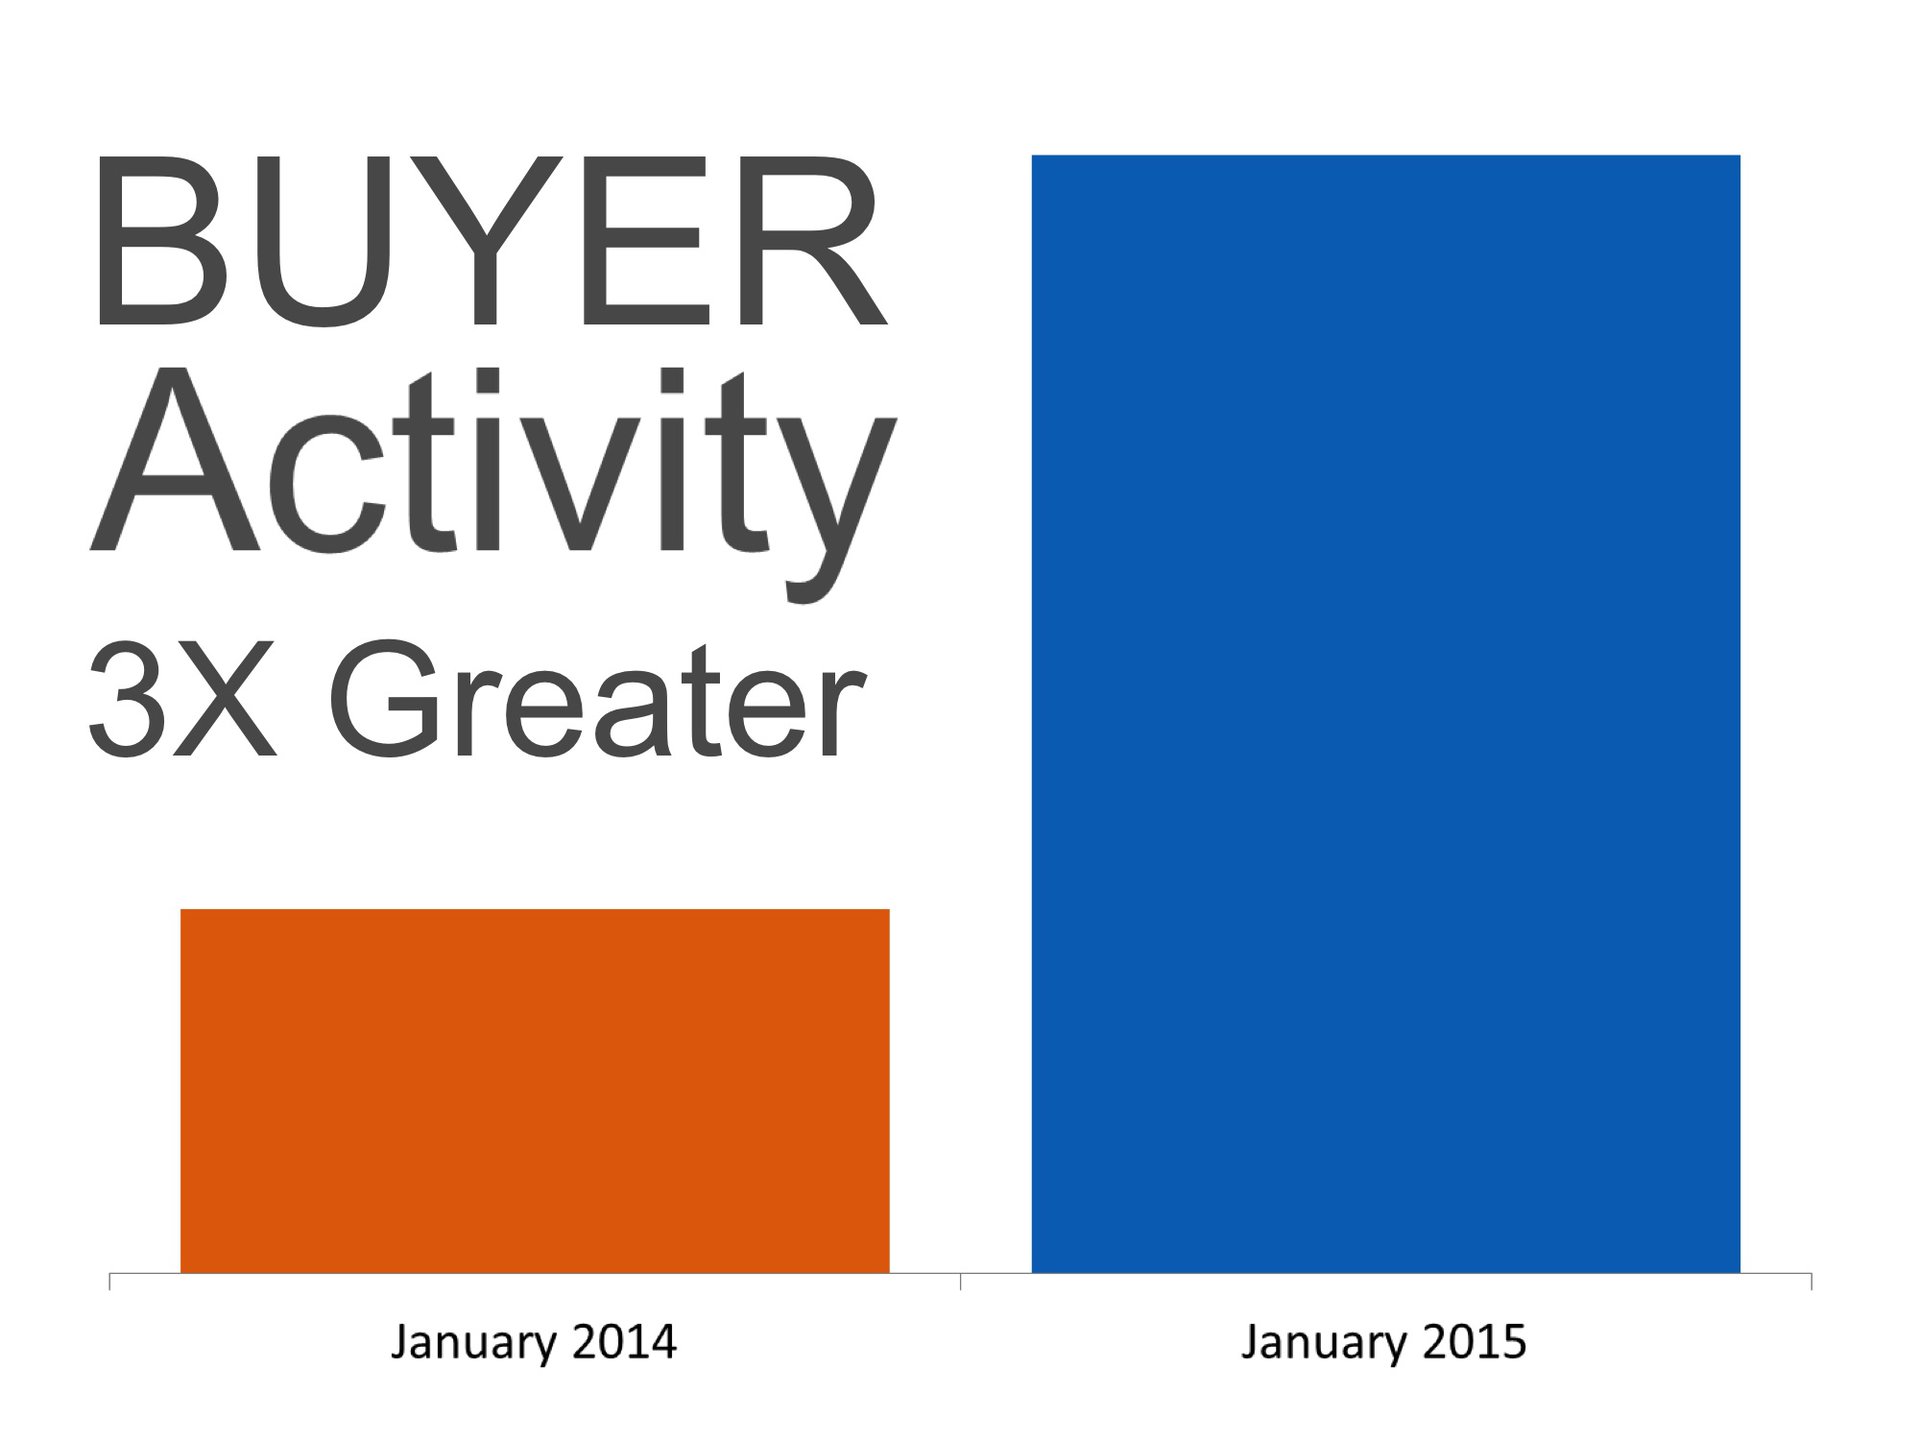 Buyer Activity | Keeping Current Matters